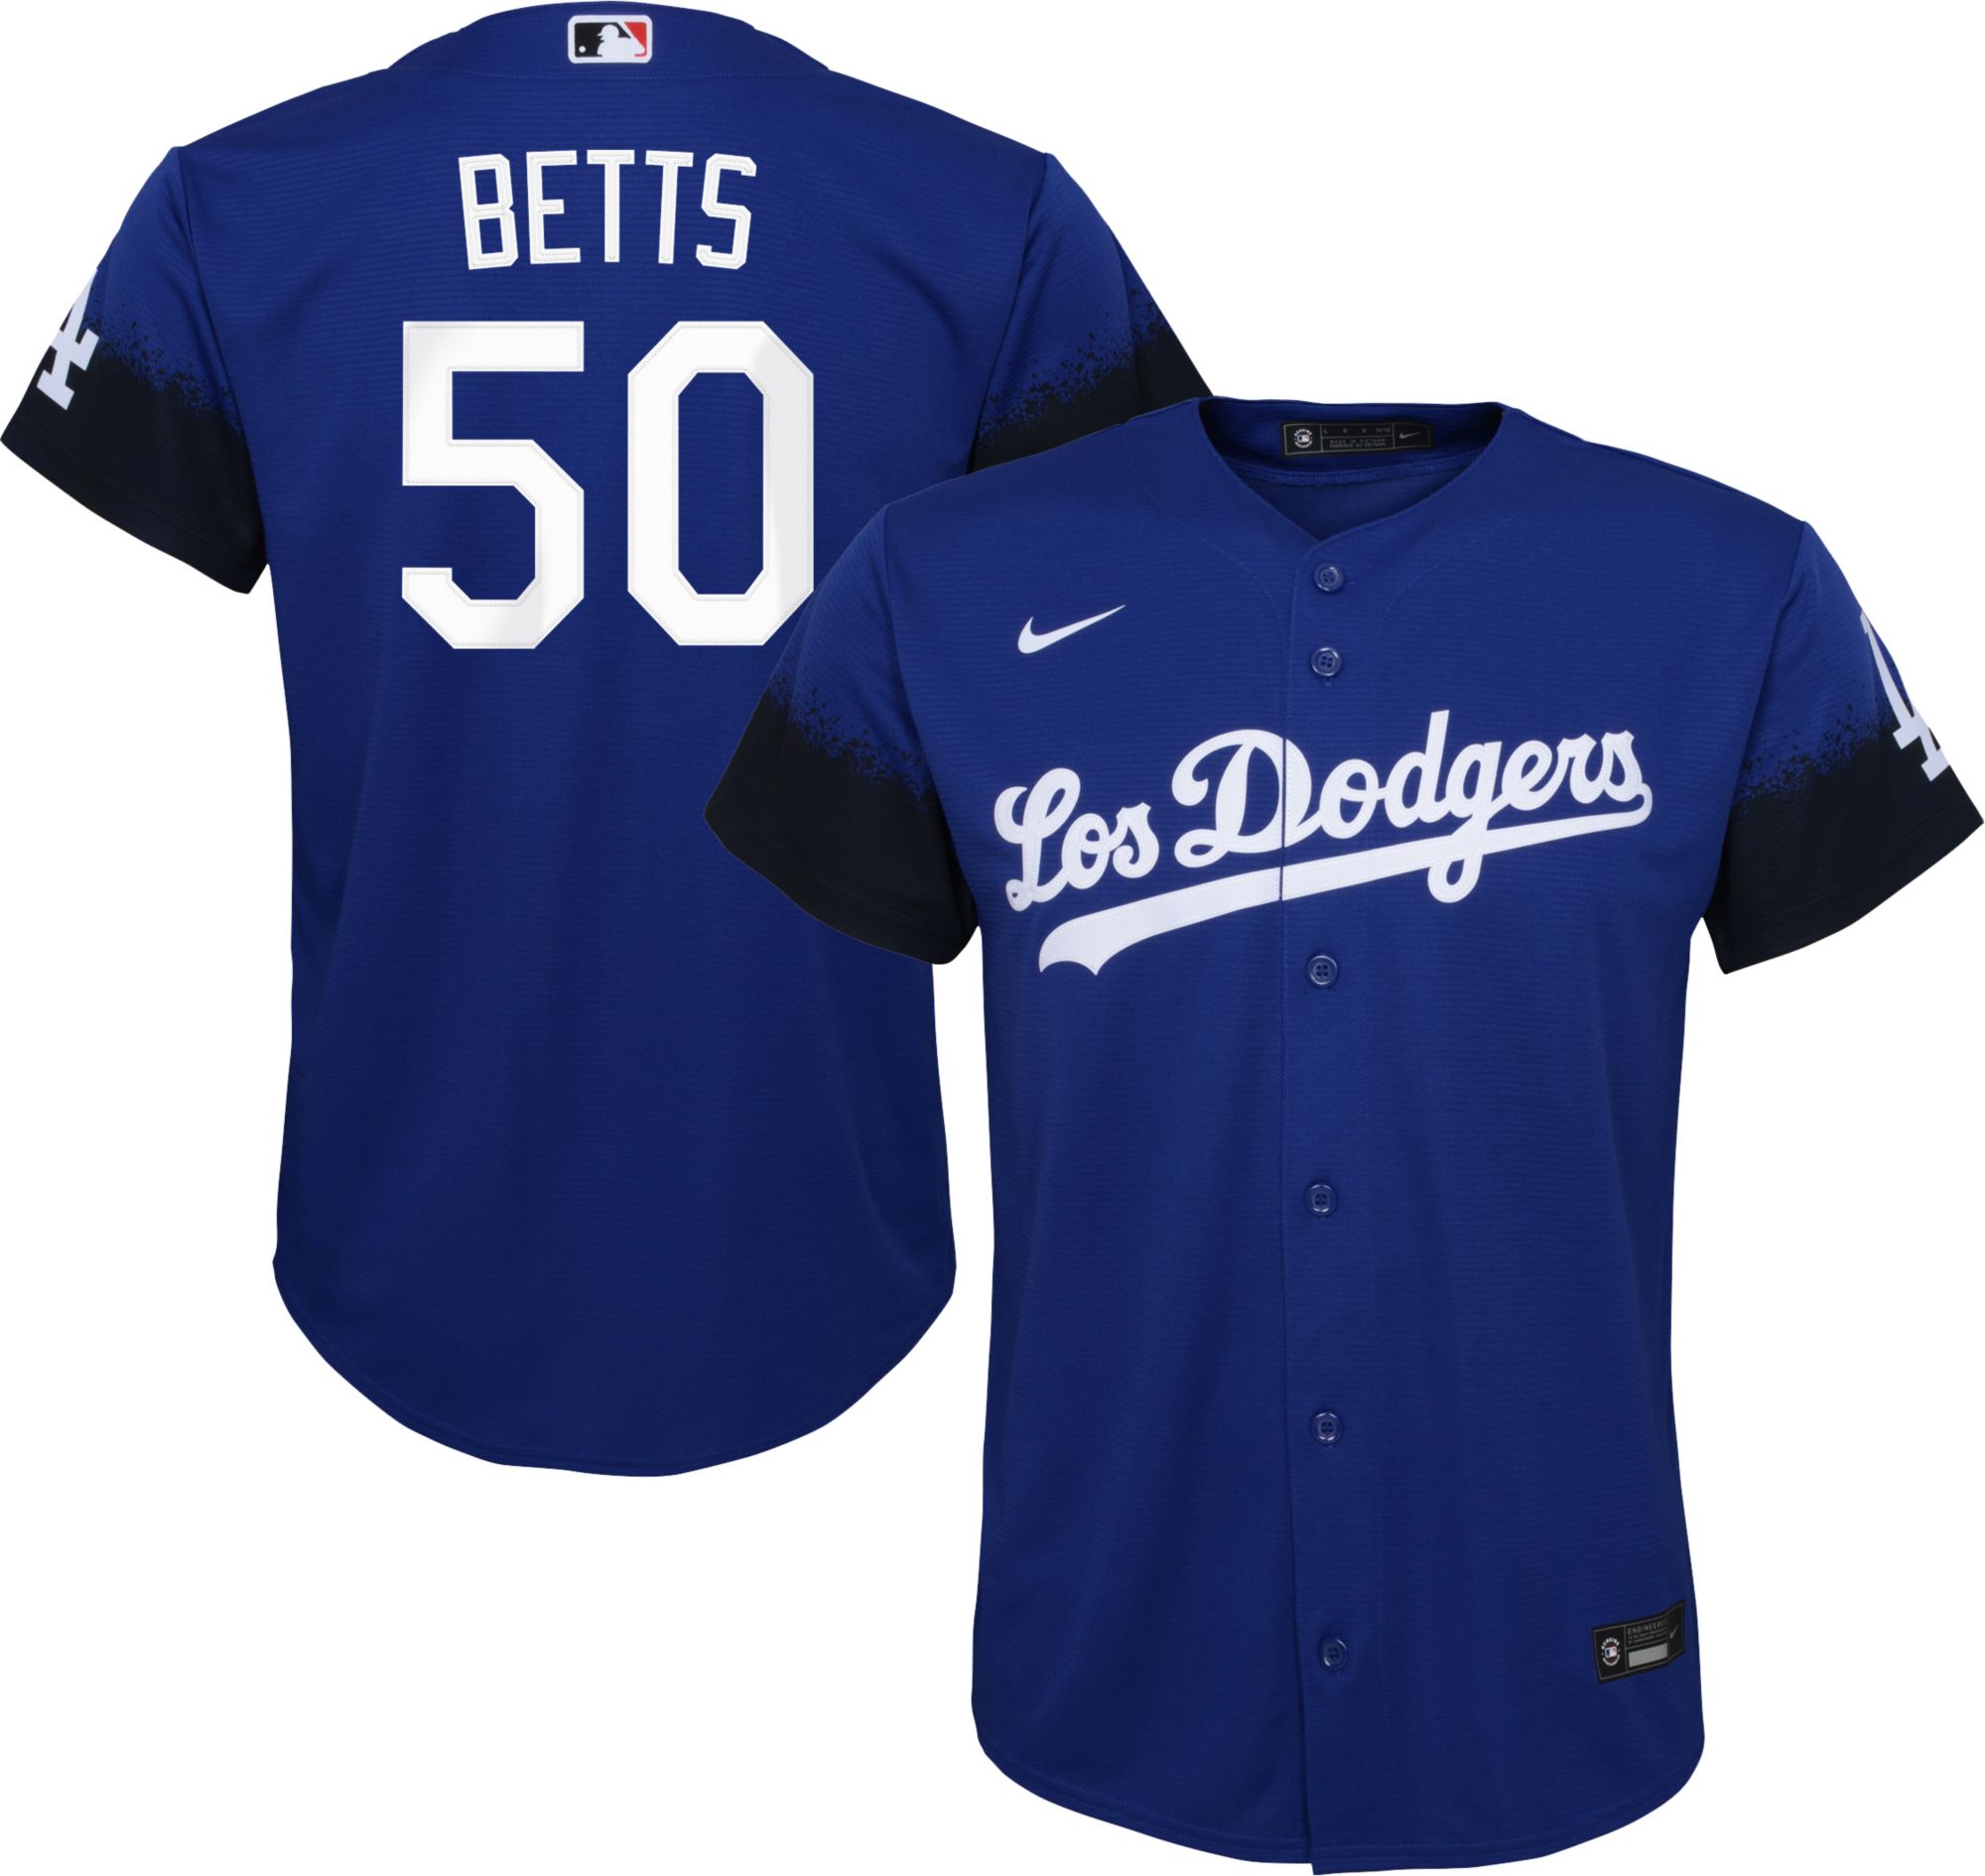 Dodgers 2022 All-Star jersey ( Blank On Back) for Sale in Ontario